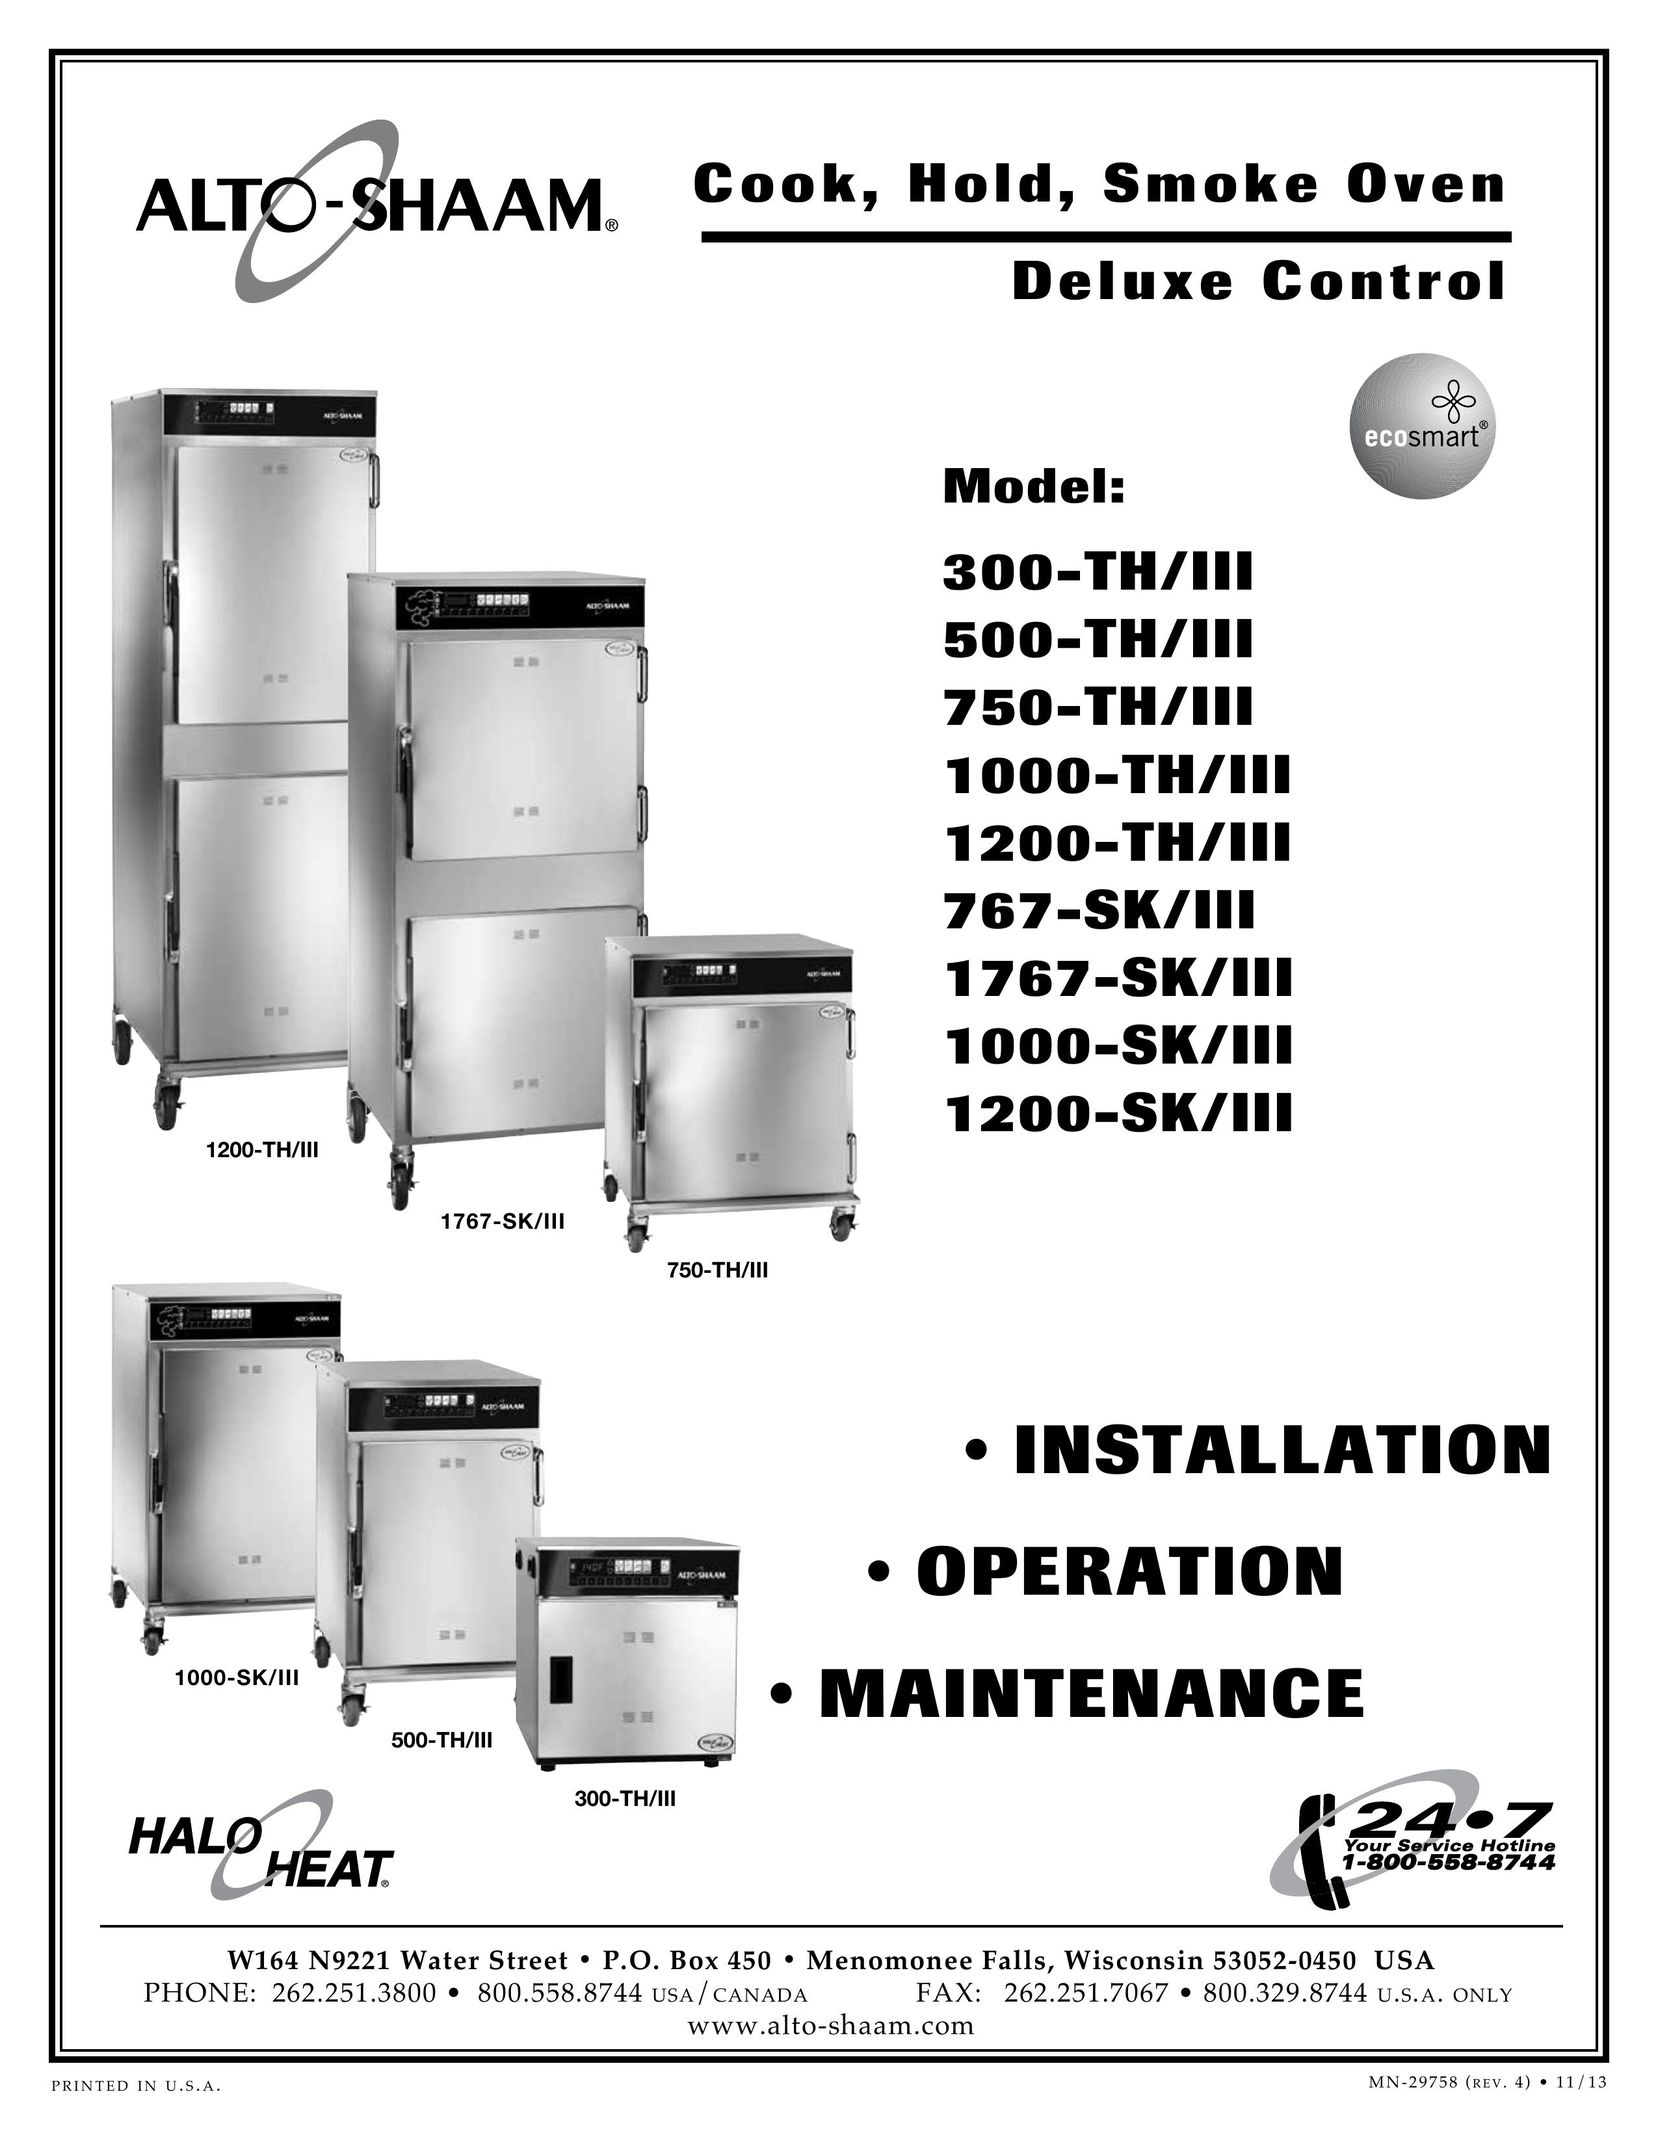 Alto-Shaam 300-TH/III Convection Oven User Manual